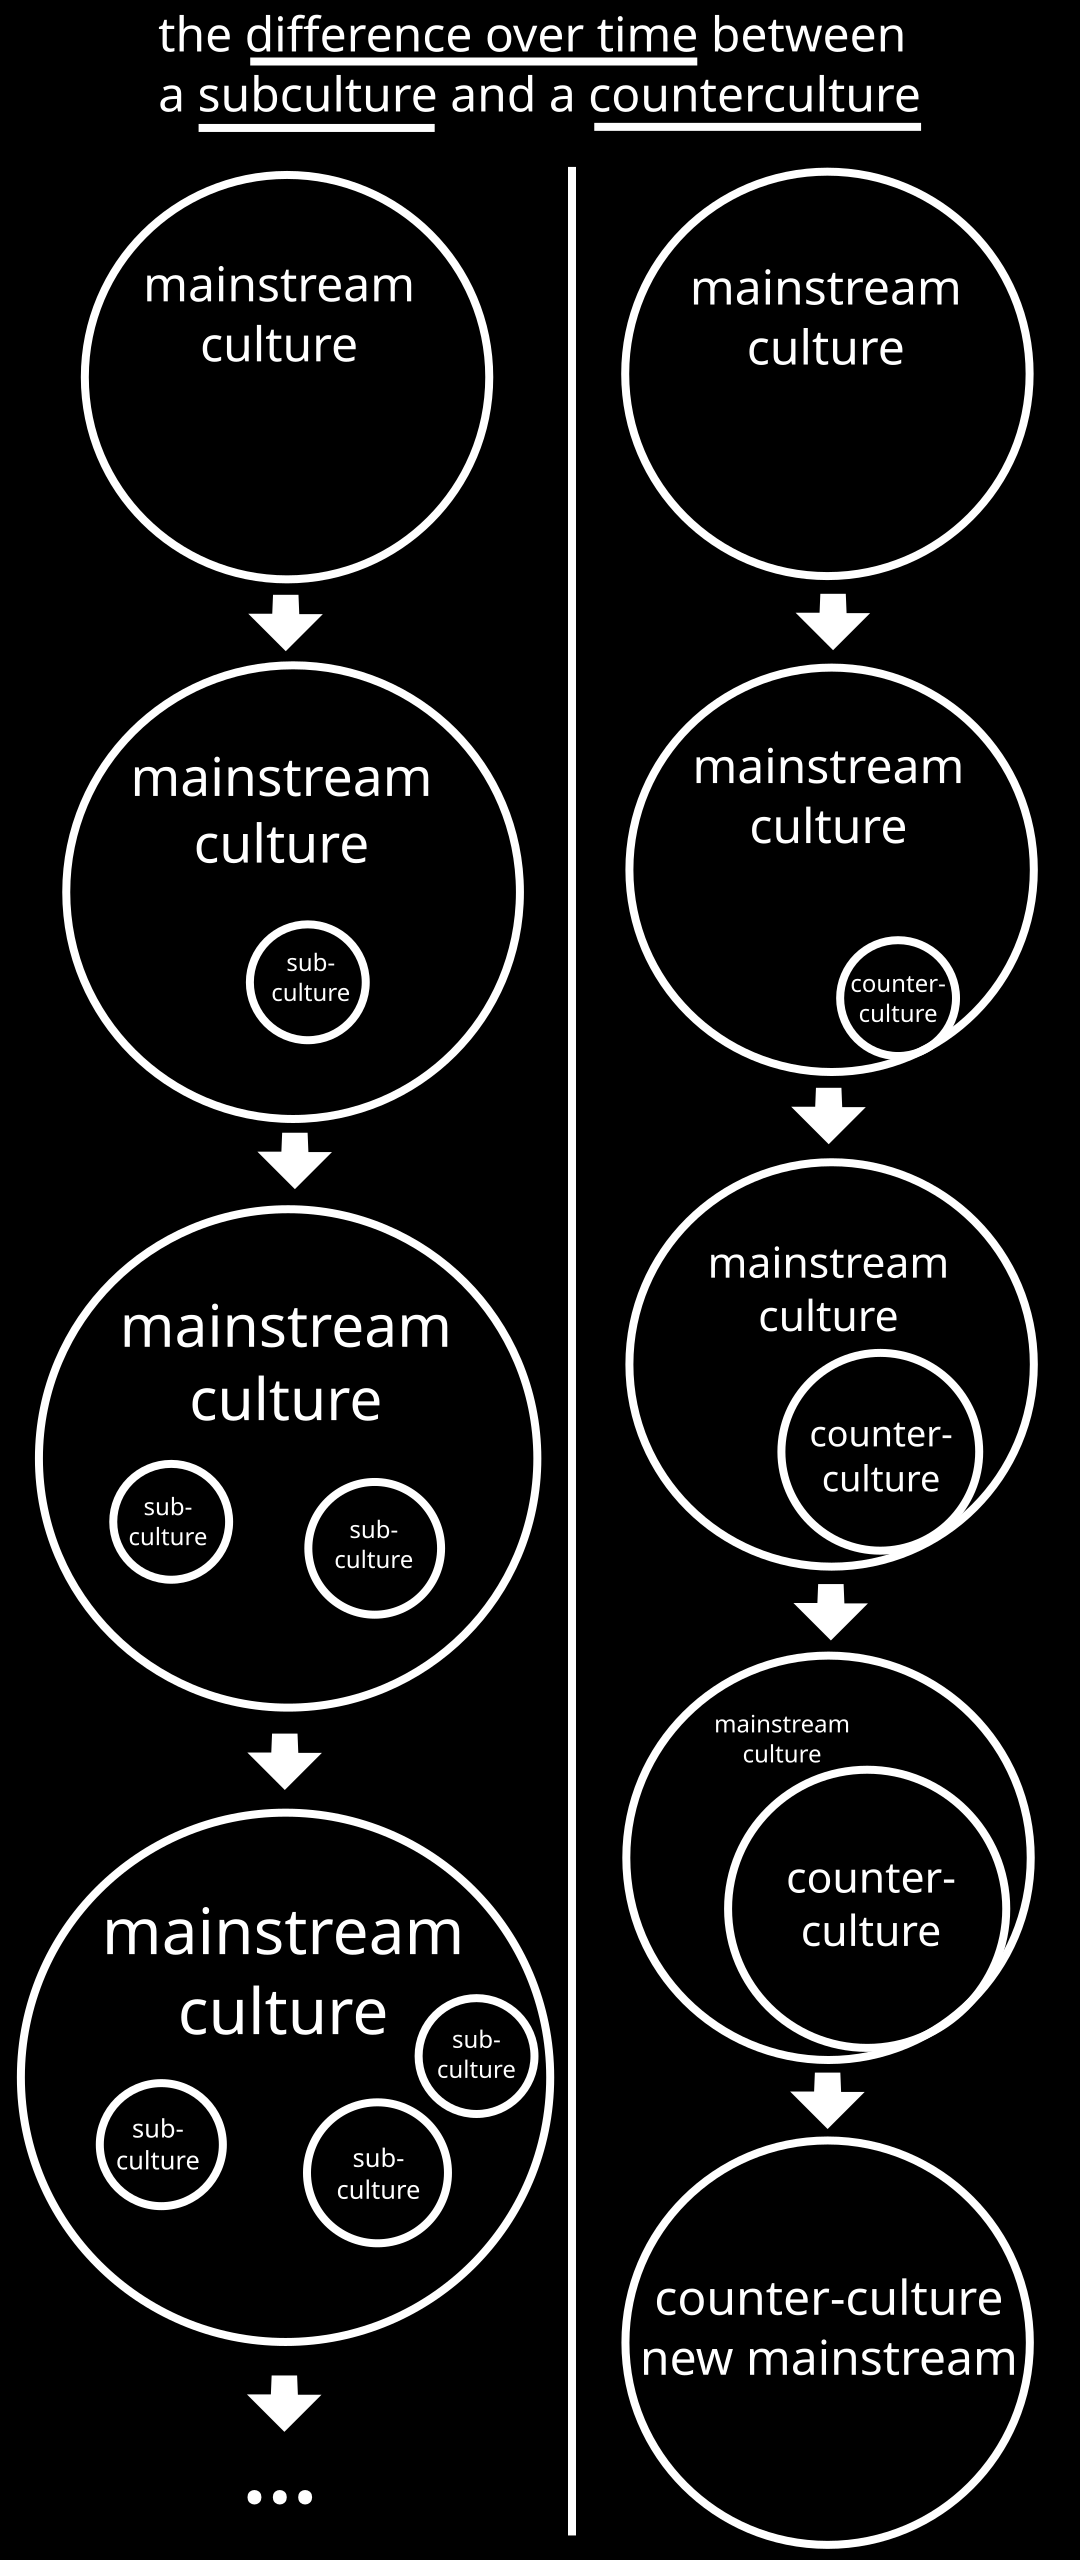 a graphic depicting the difference between a subculture and a counterculture